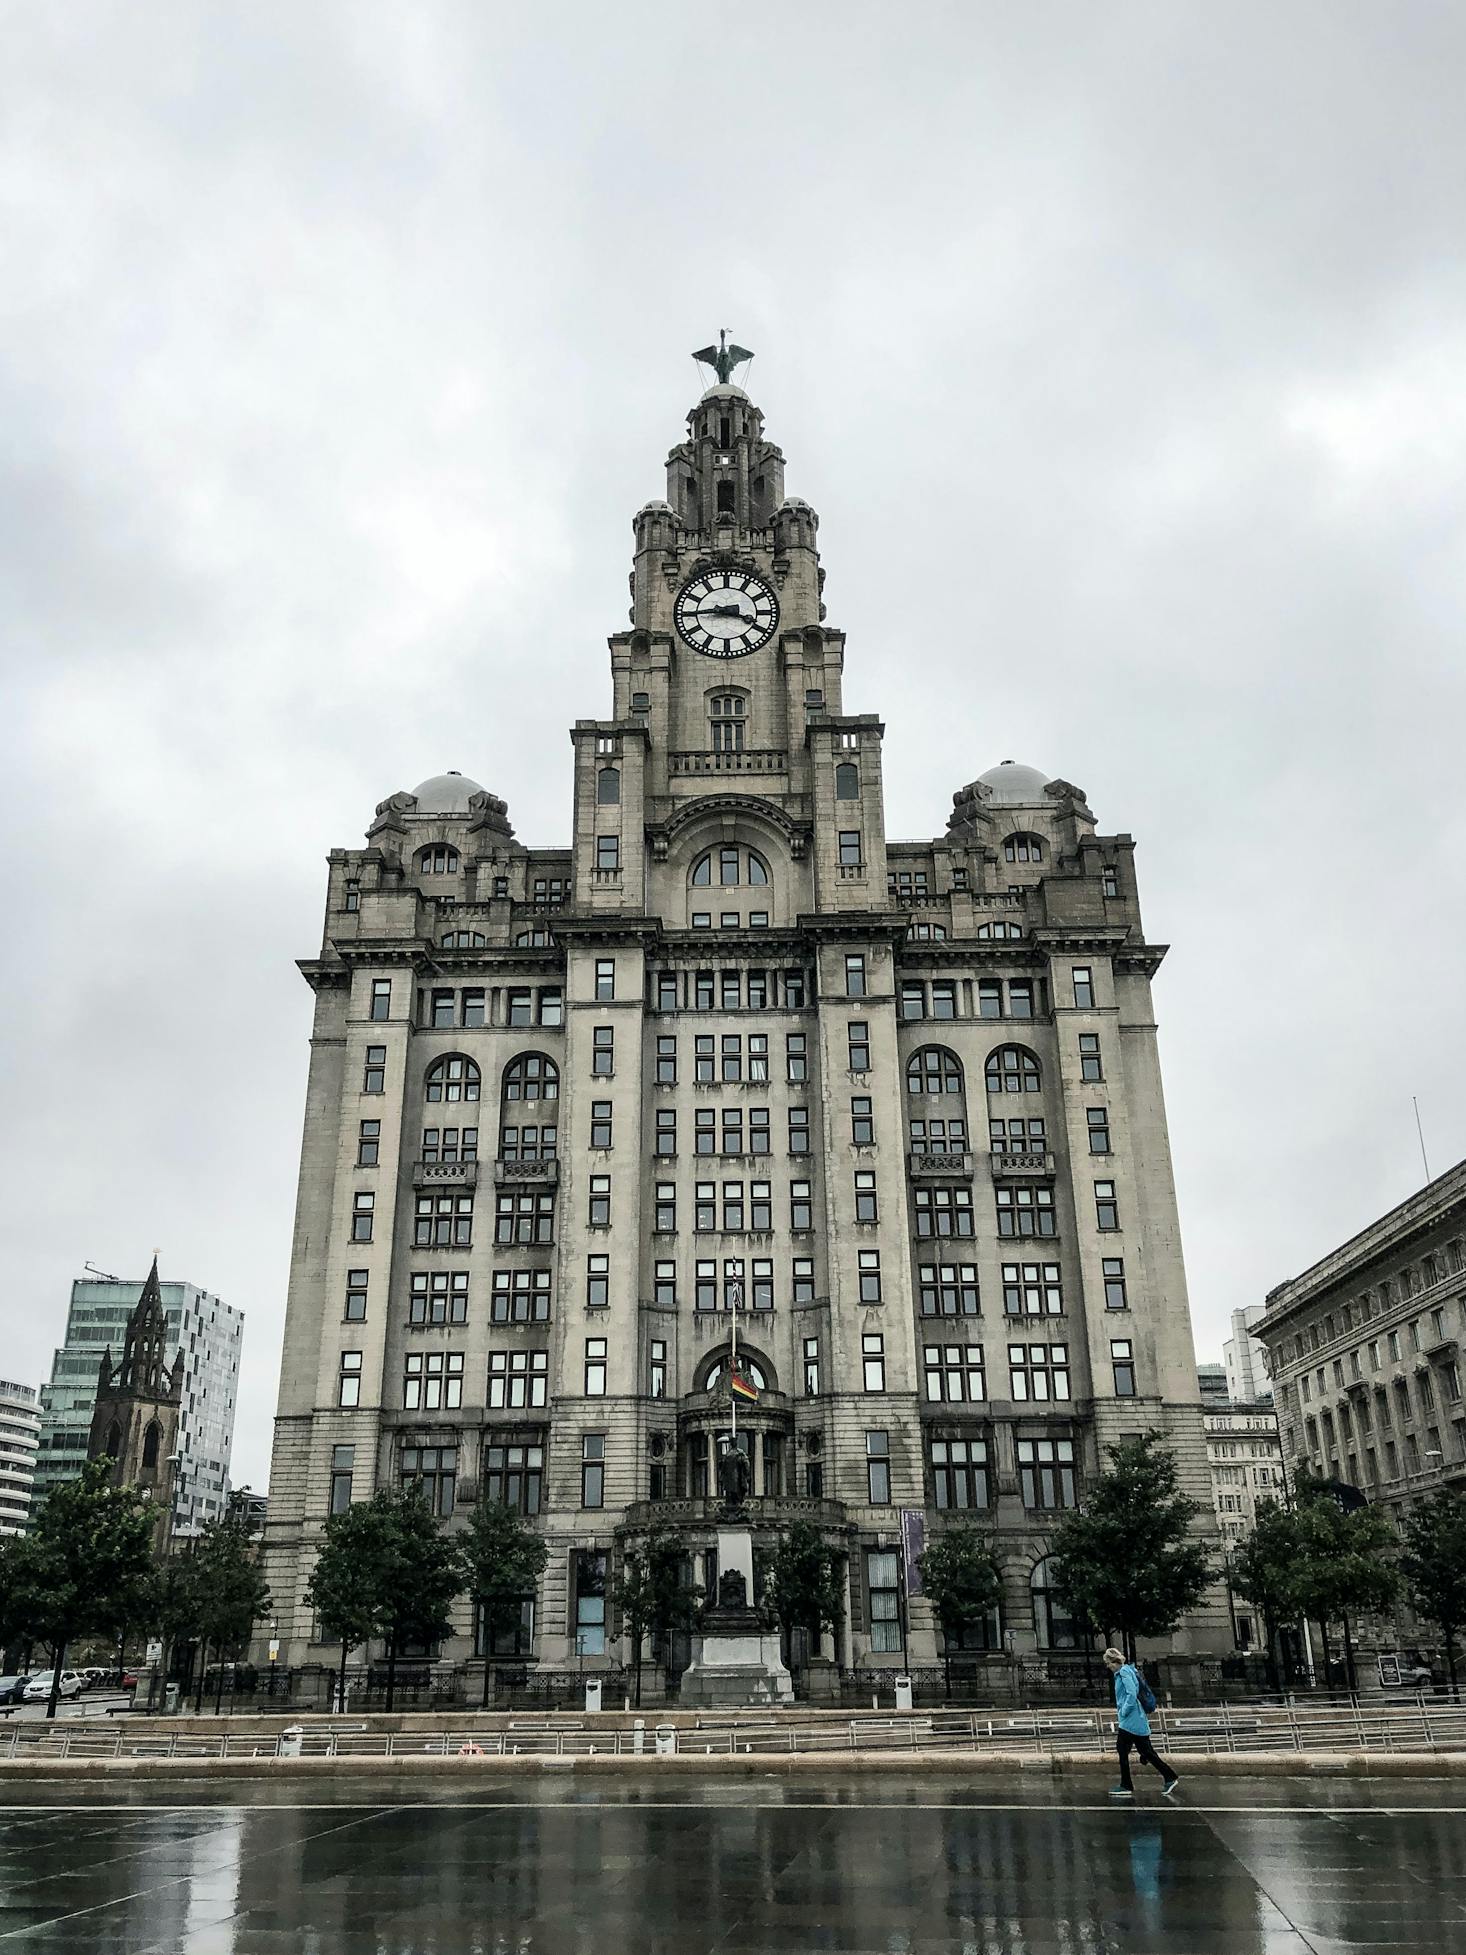 Liverpool On a Rainy Day